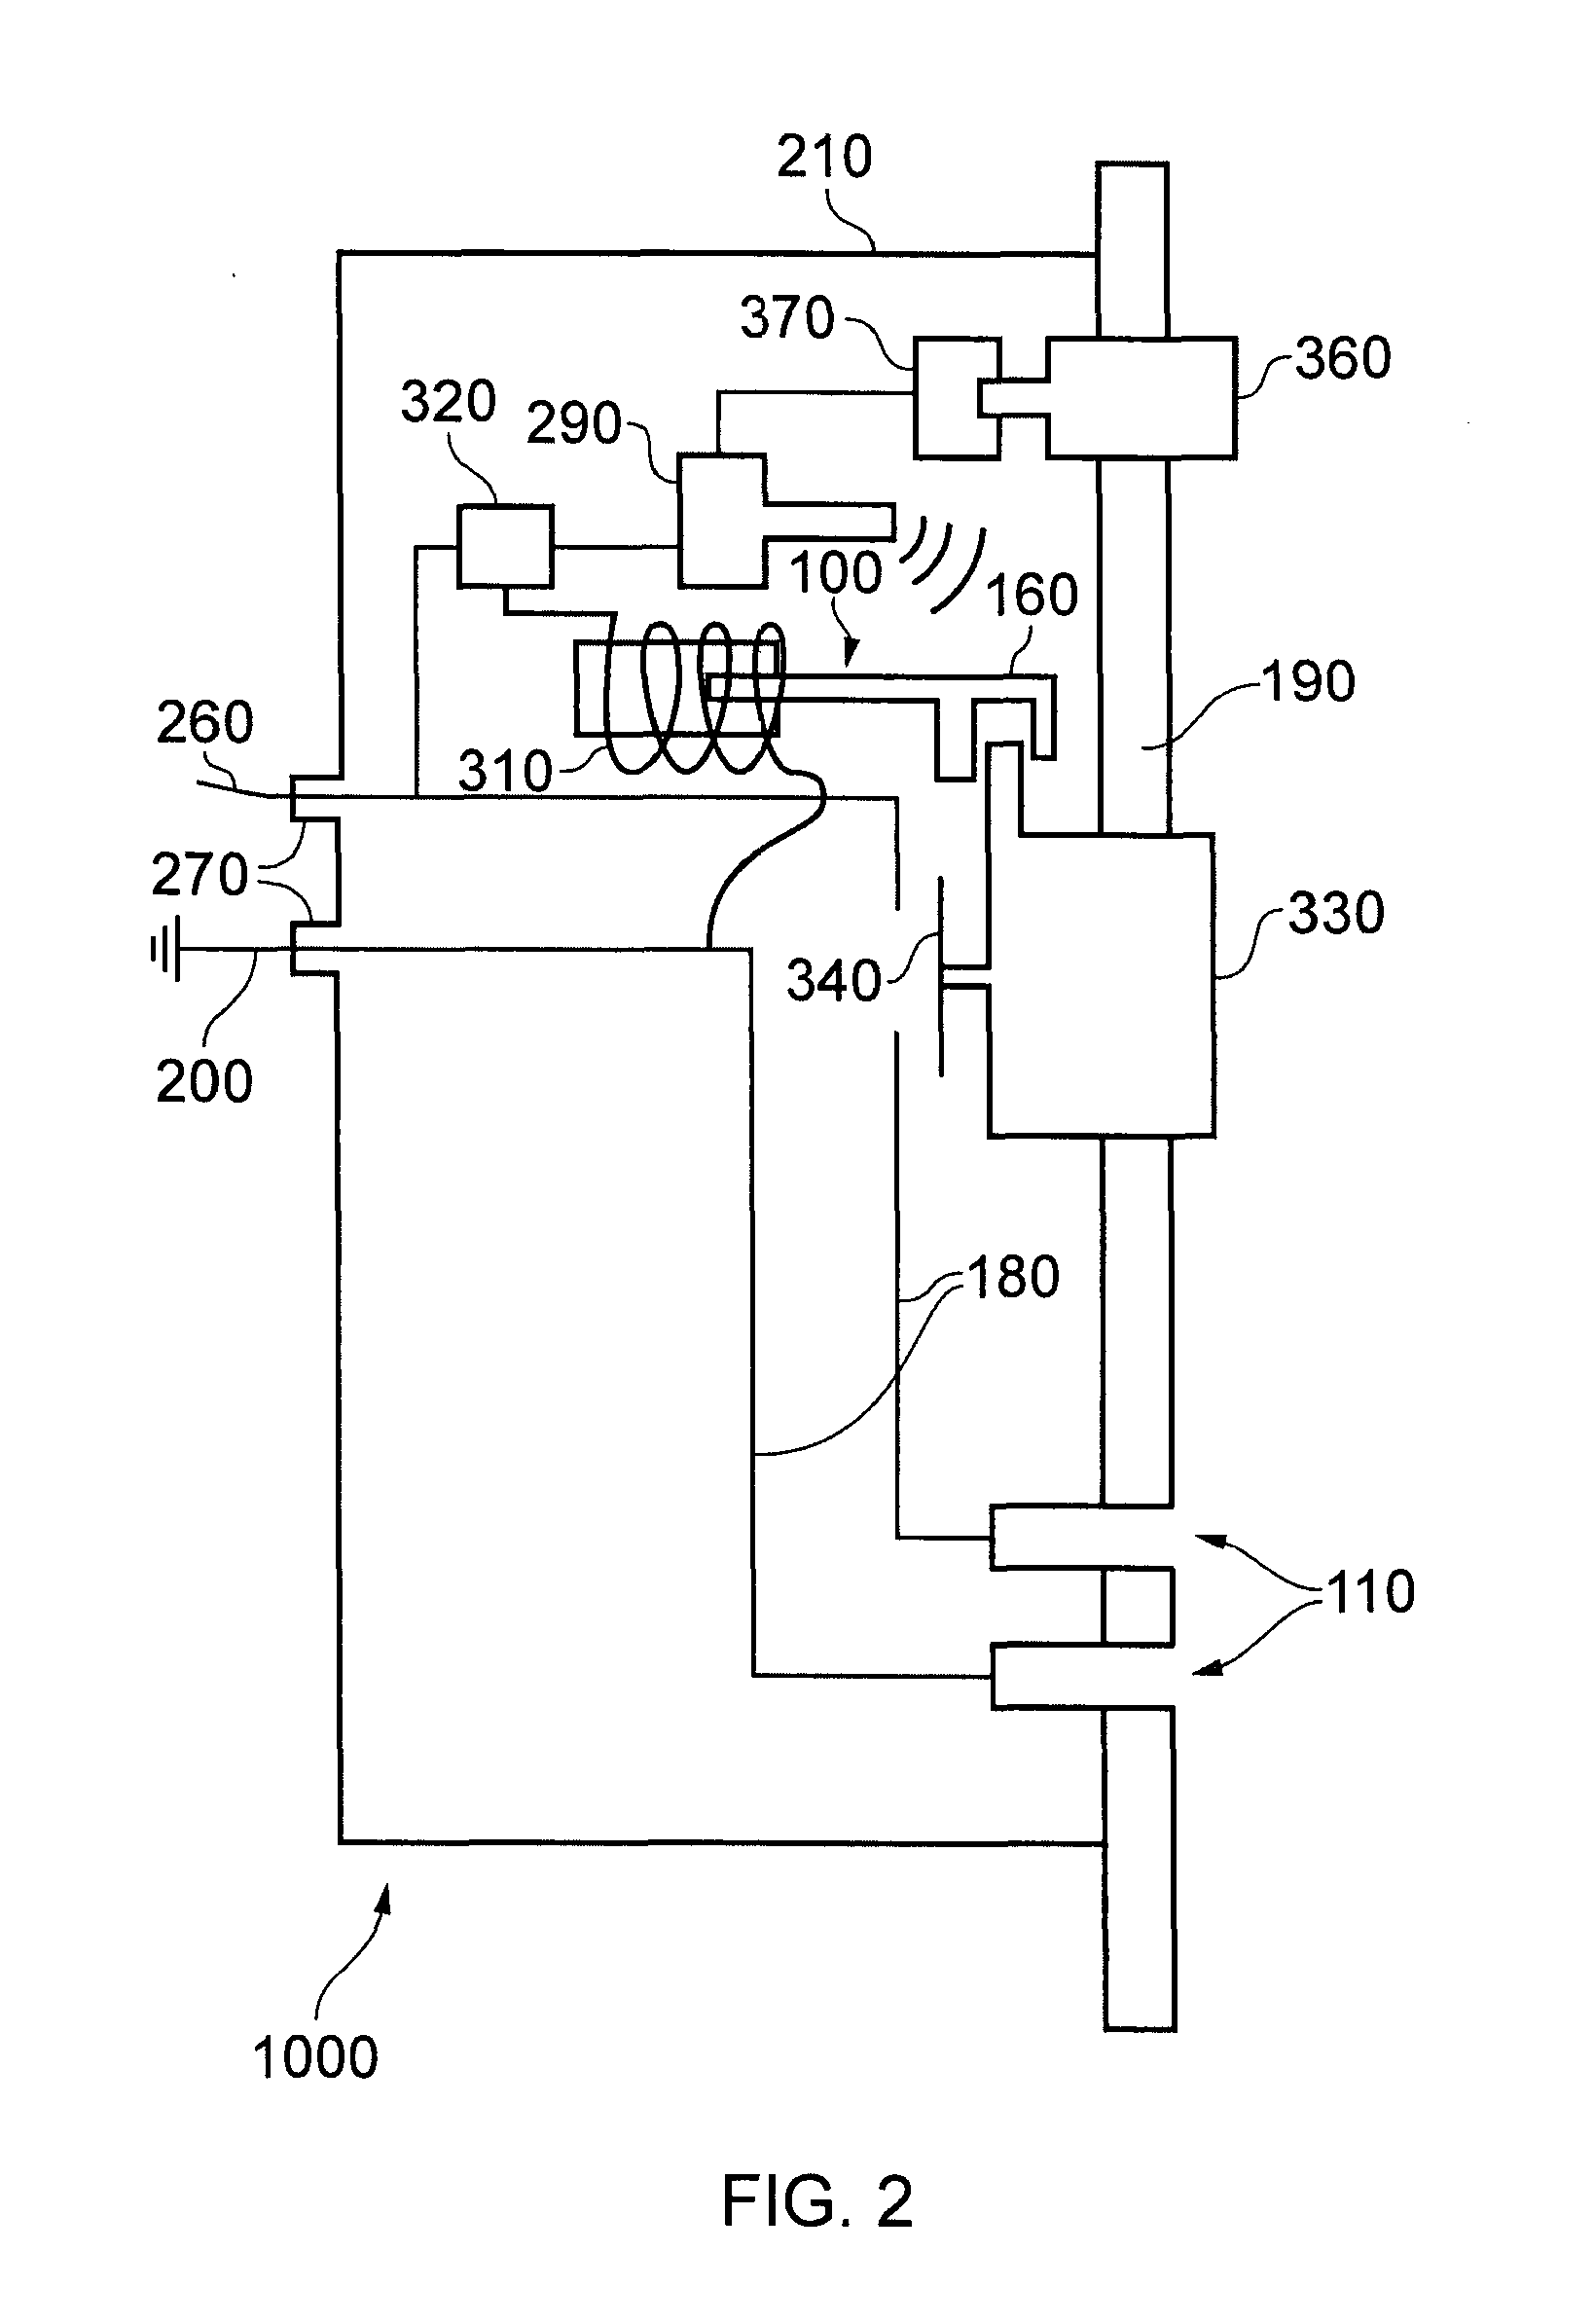 A remote controllable switch operating device